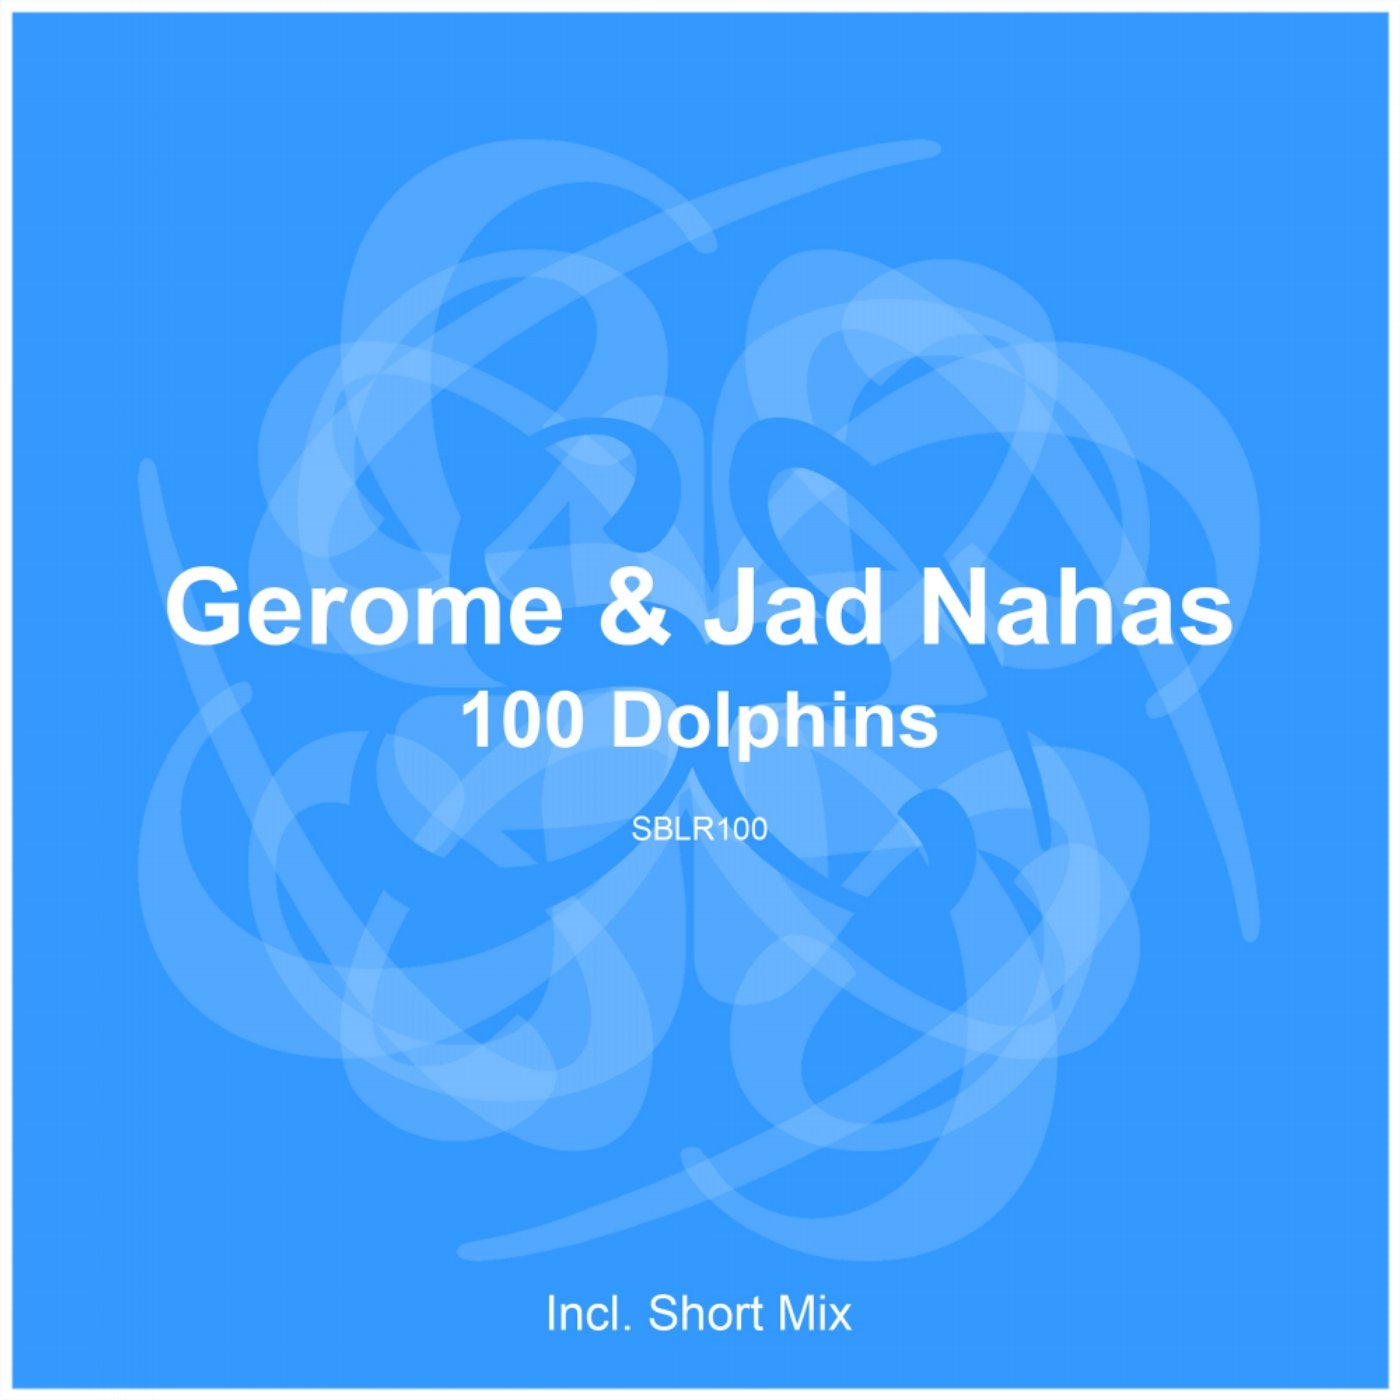 100 Dolphins